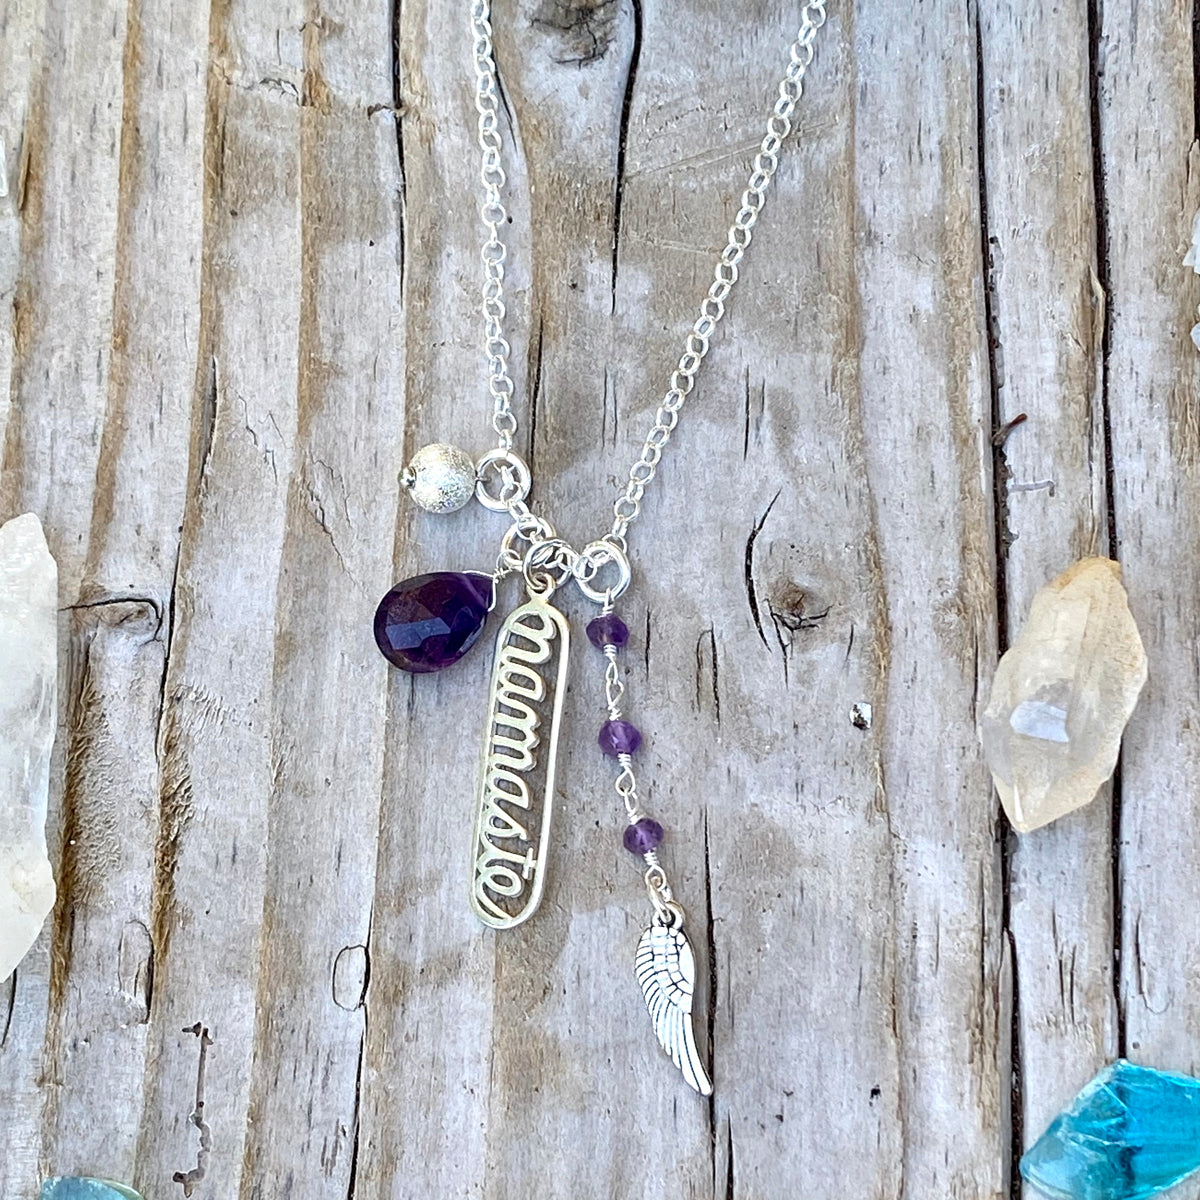 Sterling Silver Spiritual Namaste Yoga Necklace with Angel Wing and Amethyst